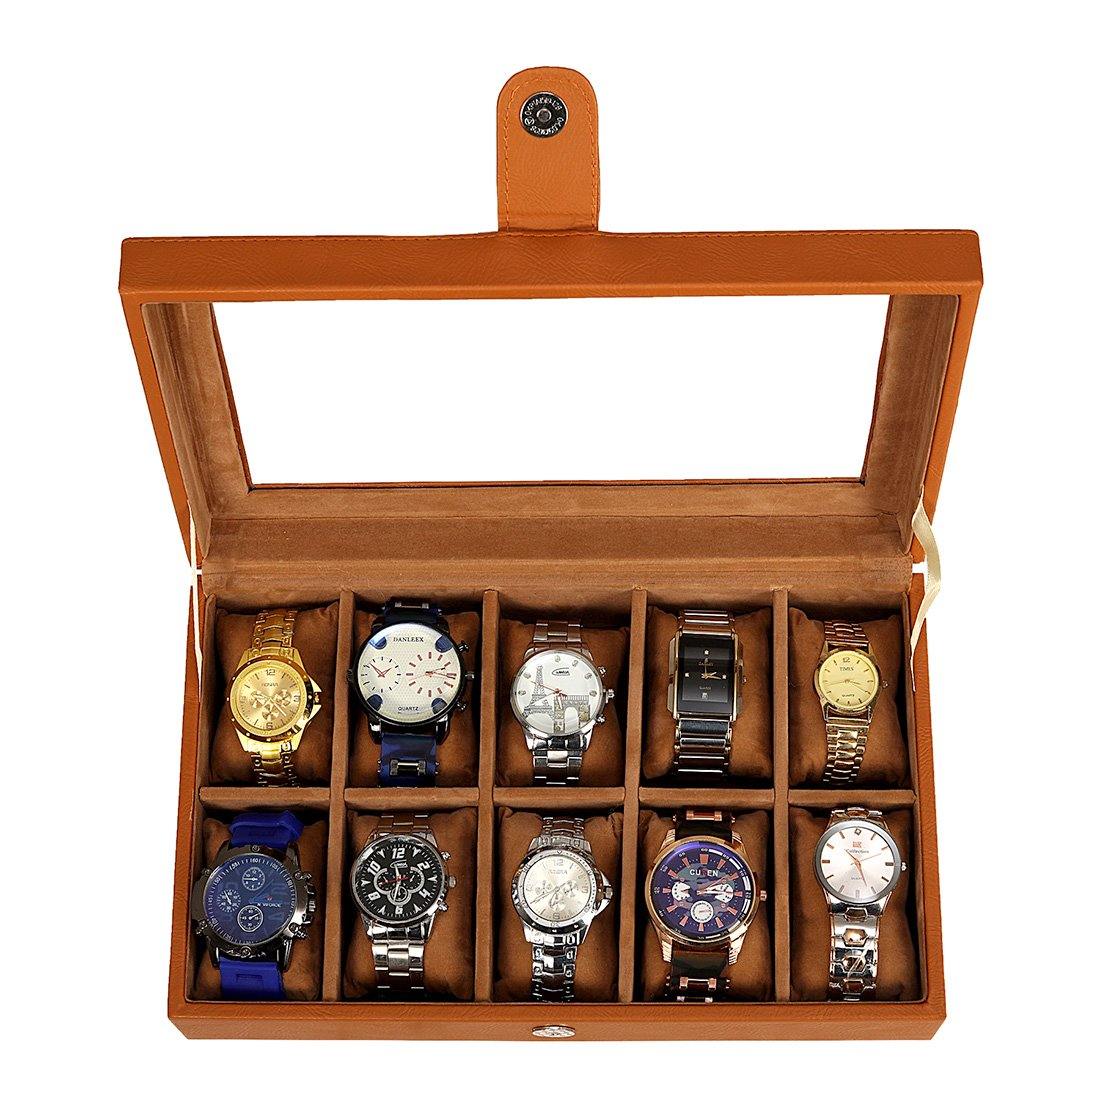 Leather World 10 Slots Elegant Watch Box With Viewing Window